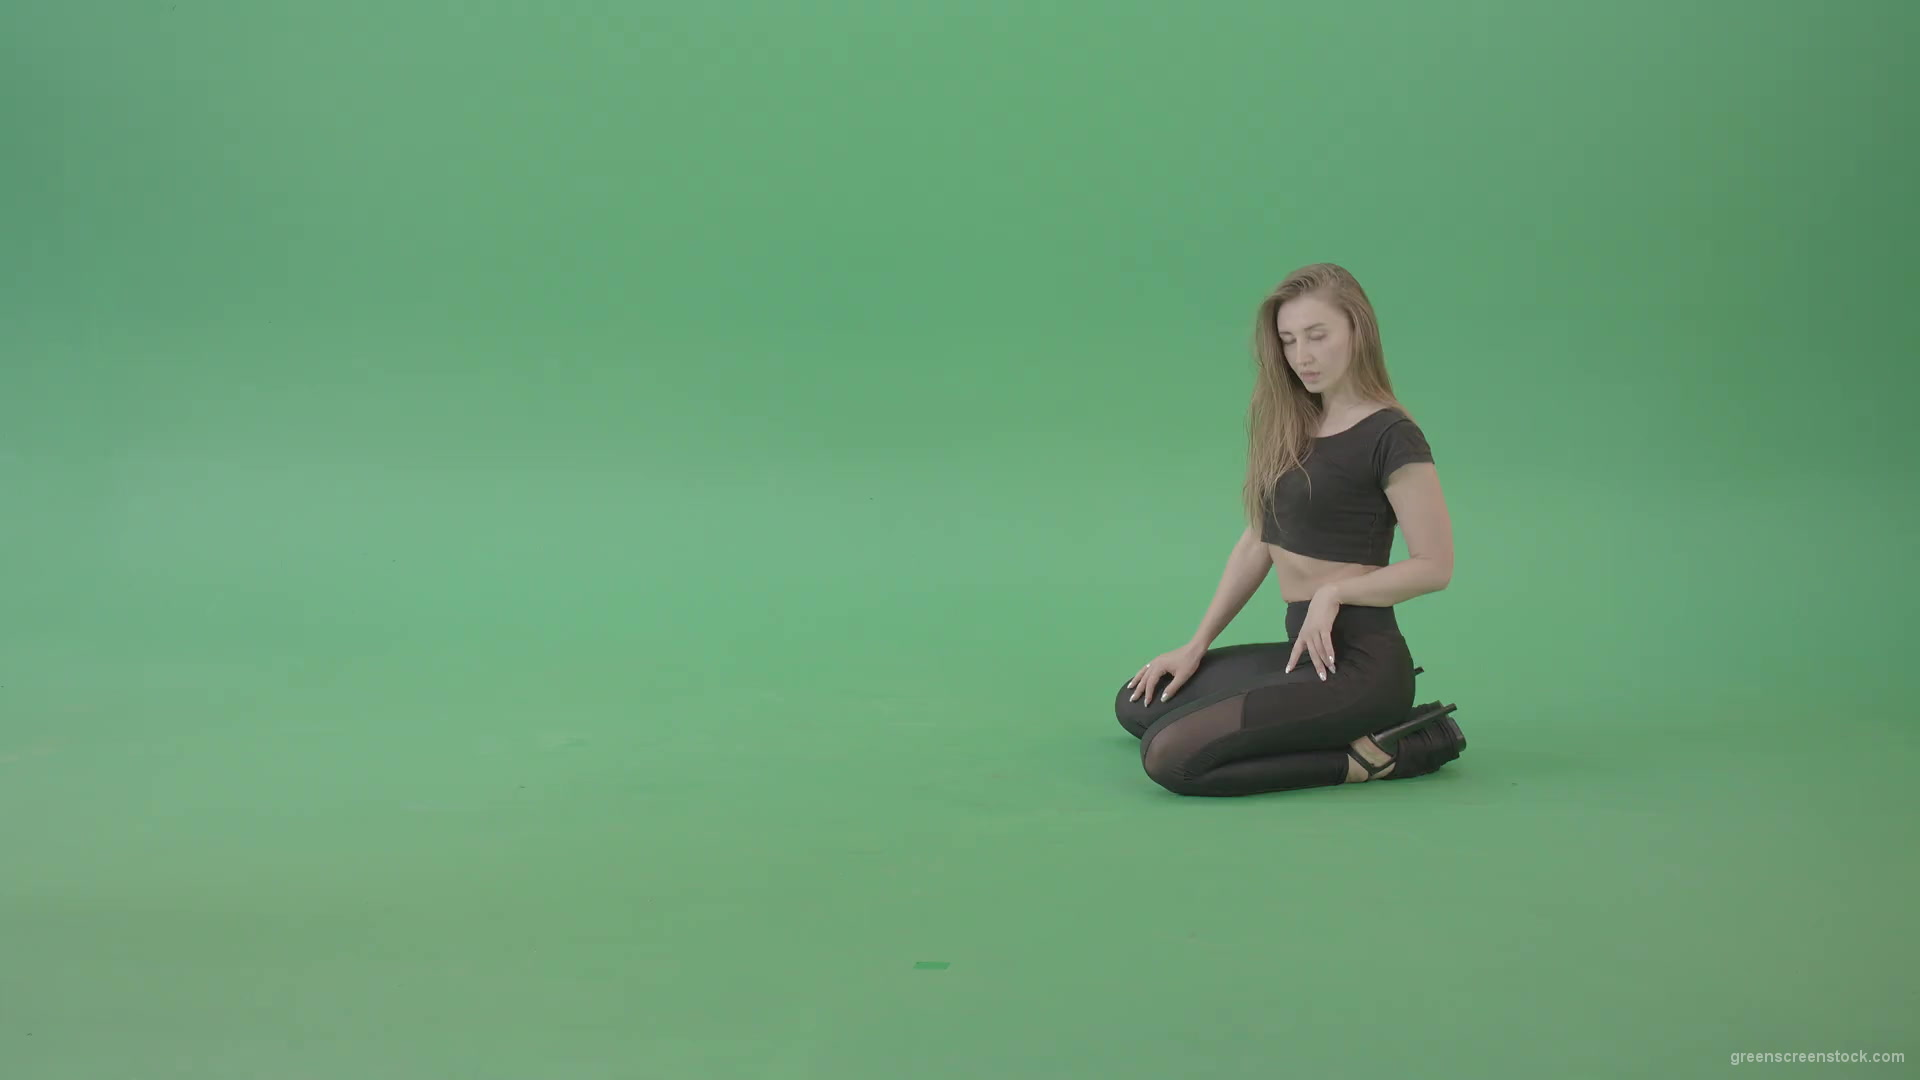 Exotic-erotic-dancing-girl-on-green-screen-play-Doggy-Style-4K-Video-Footage-1920_001 Green Screen Stock